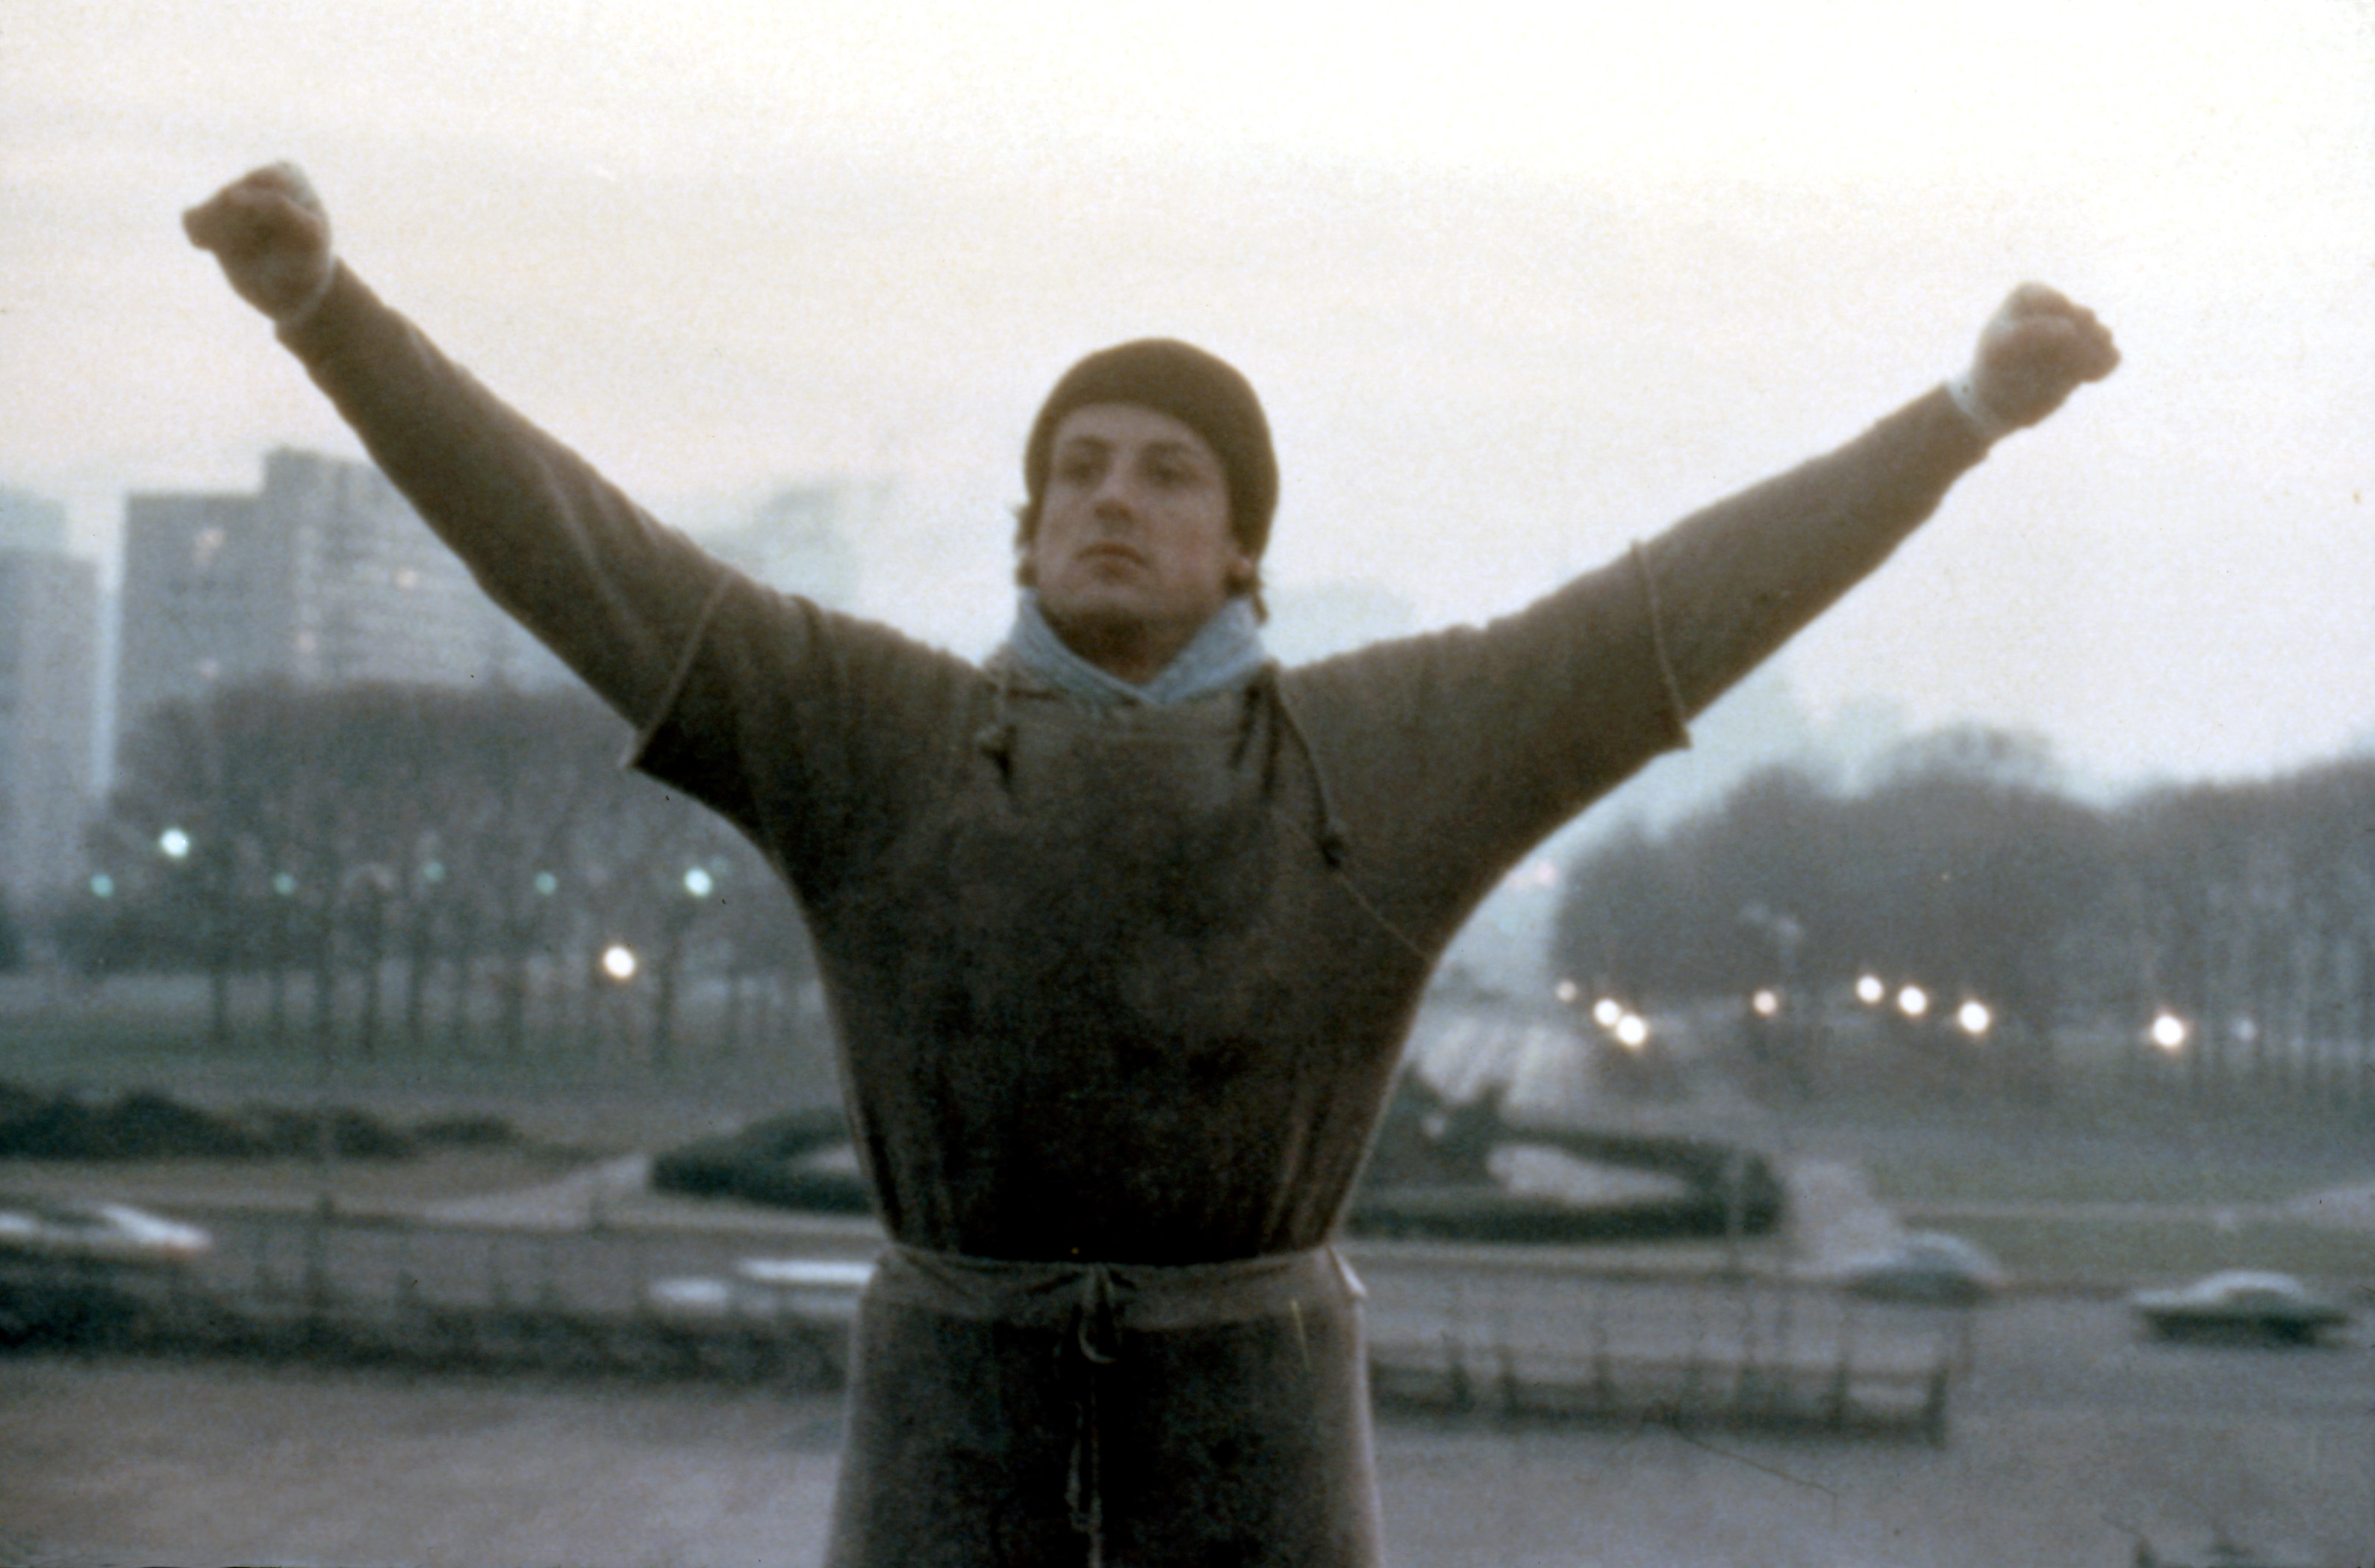 Sylvester Stallone as Rocky Balboa in a gray sweatshirt with arms raised in triumph